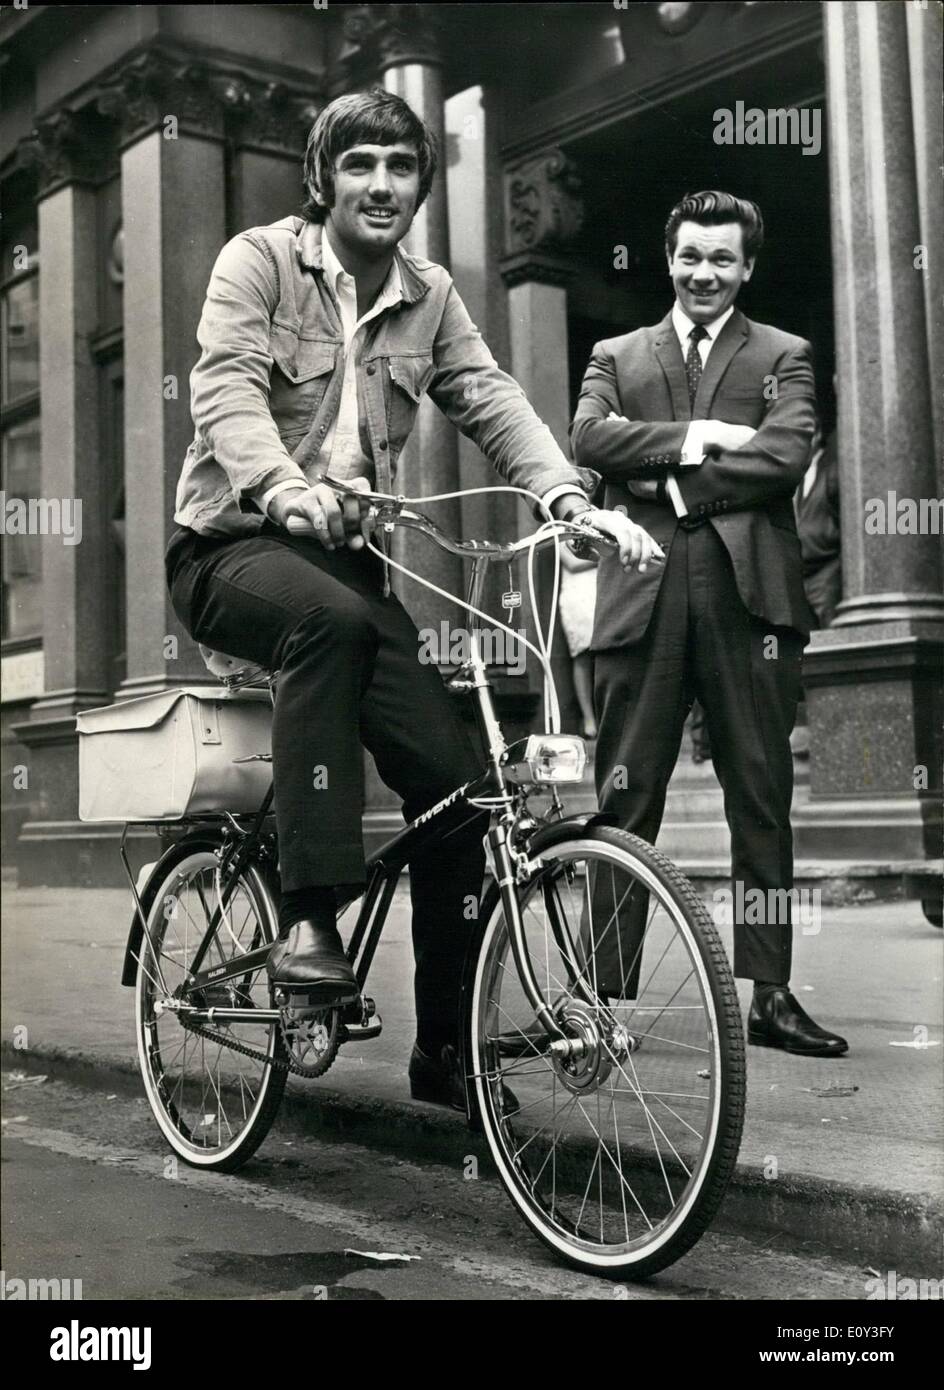 Jul. 07, 1968 - GEORGE BEST - BANNED FROM DRIVING FOR SIX MONTHS - IS PRESENTED WITH A BICYCLE. Banned from driving for six months by a Manchester Court, Manchester United's ''Footballer of the Year'' George Best, is unperturbed. He was presented with a bicycle to solve his transport problems. George received the cycle prior to a training spell at Old Trafford ground, and he rode up and down amongst the traffic to get used to the feel of his new machine. There is a large bag at the back for carrying his boots or anything else, such as fan mail Stock Photo